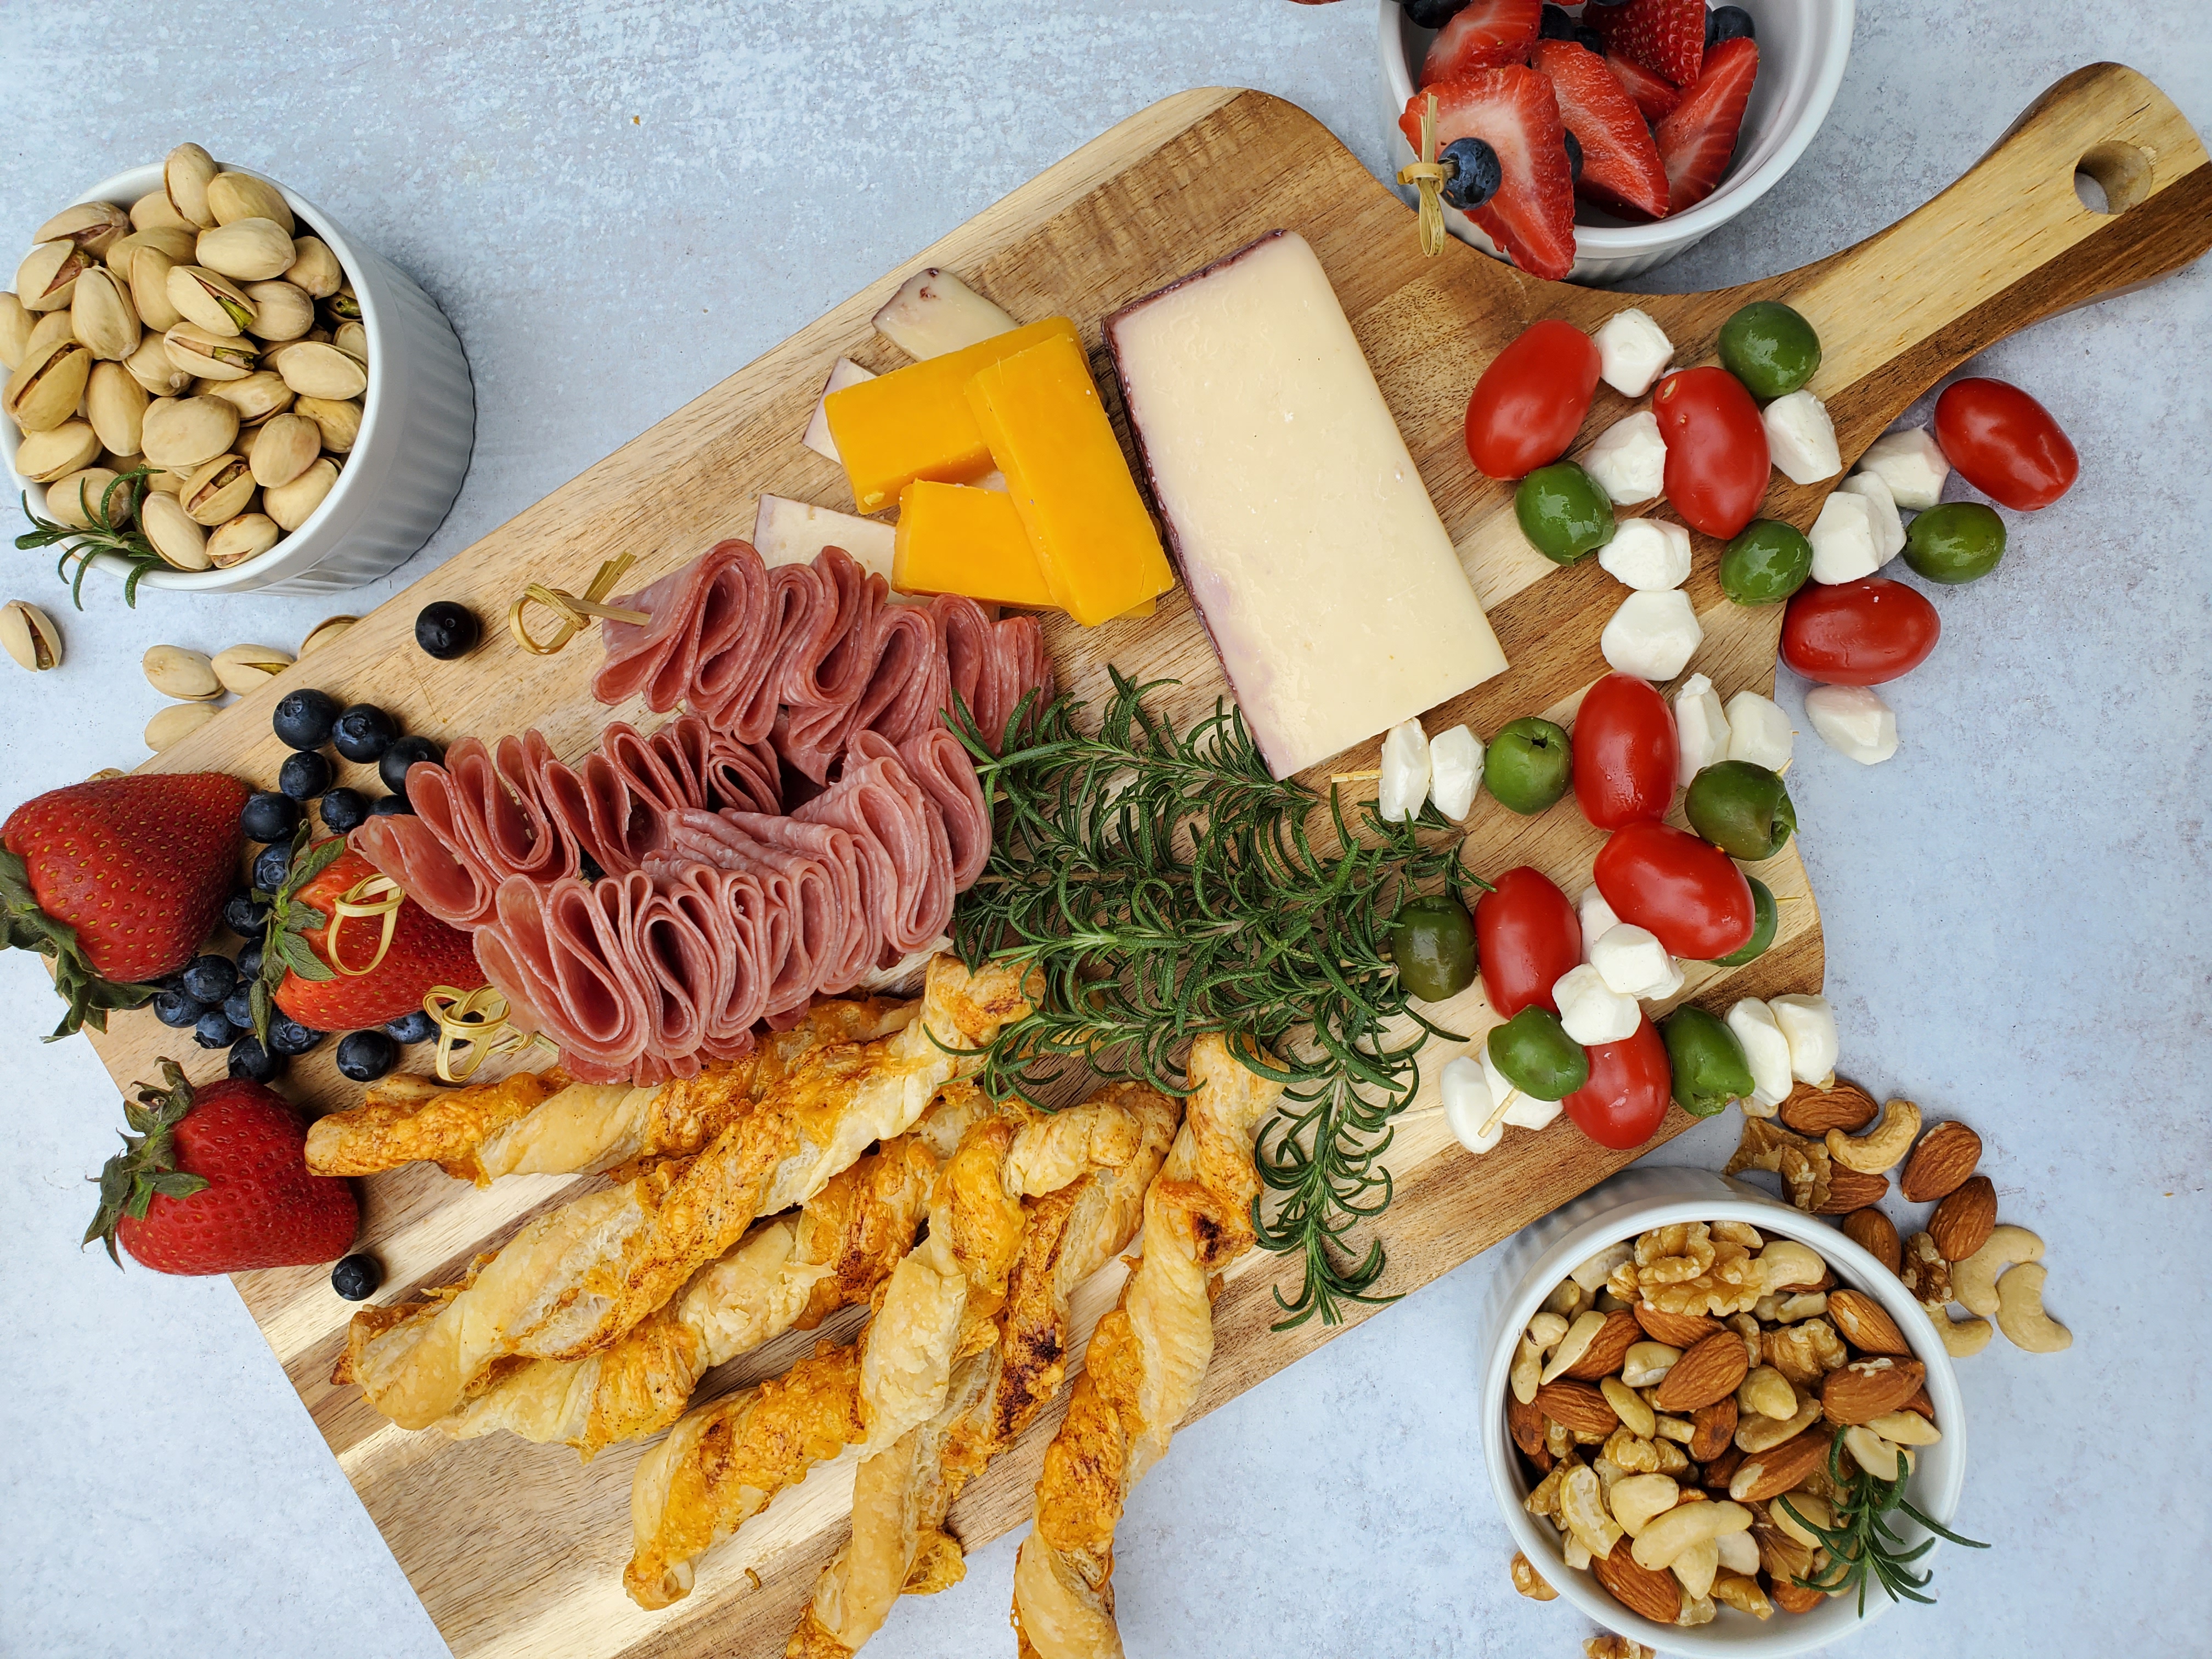 Cheeseboard with salami, a couple of cheeses, olives, nuts, and a fruit dish